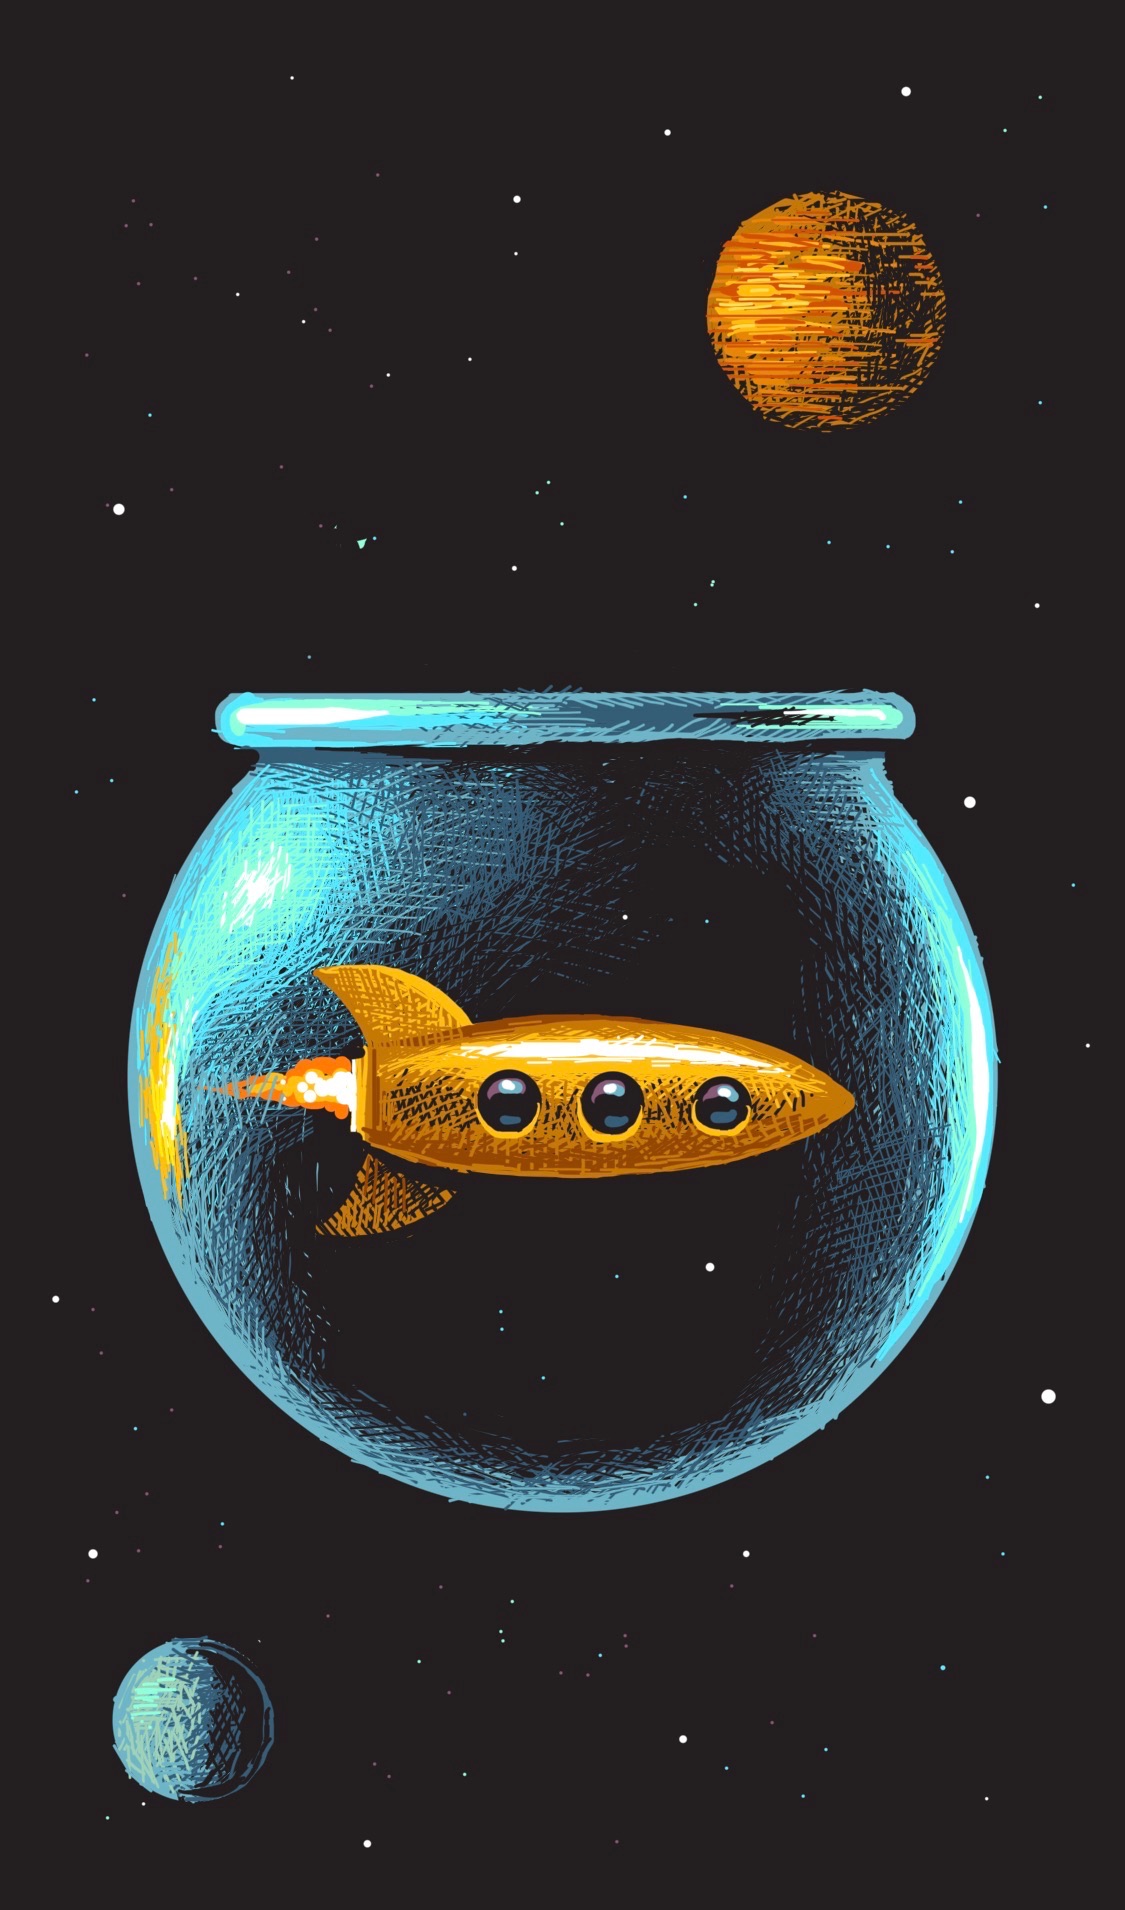 A fishbowl in space, with a golden rocket in the fishbowl